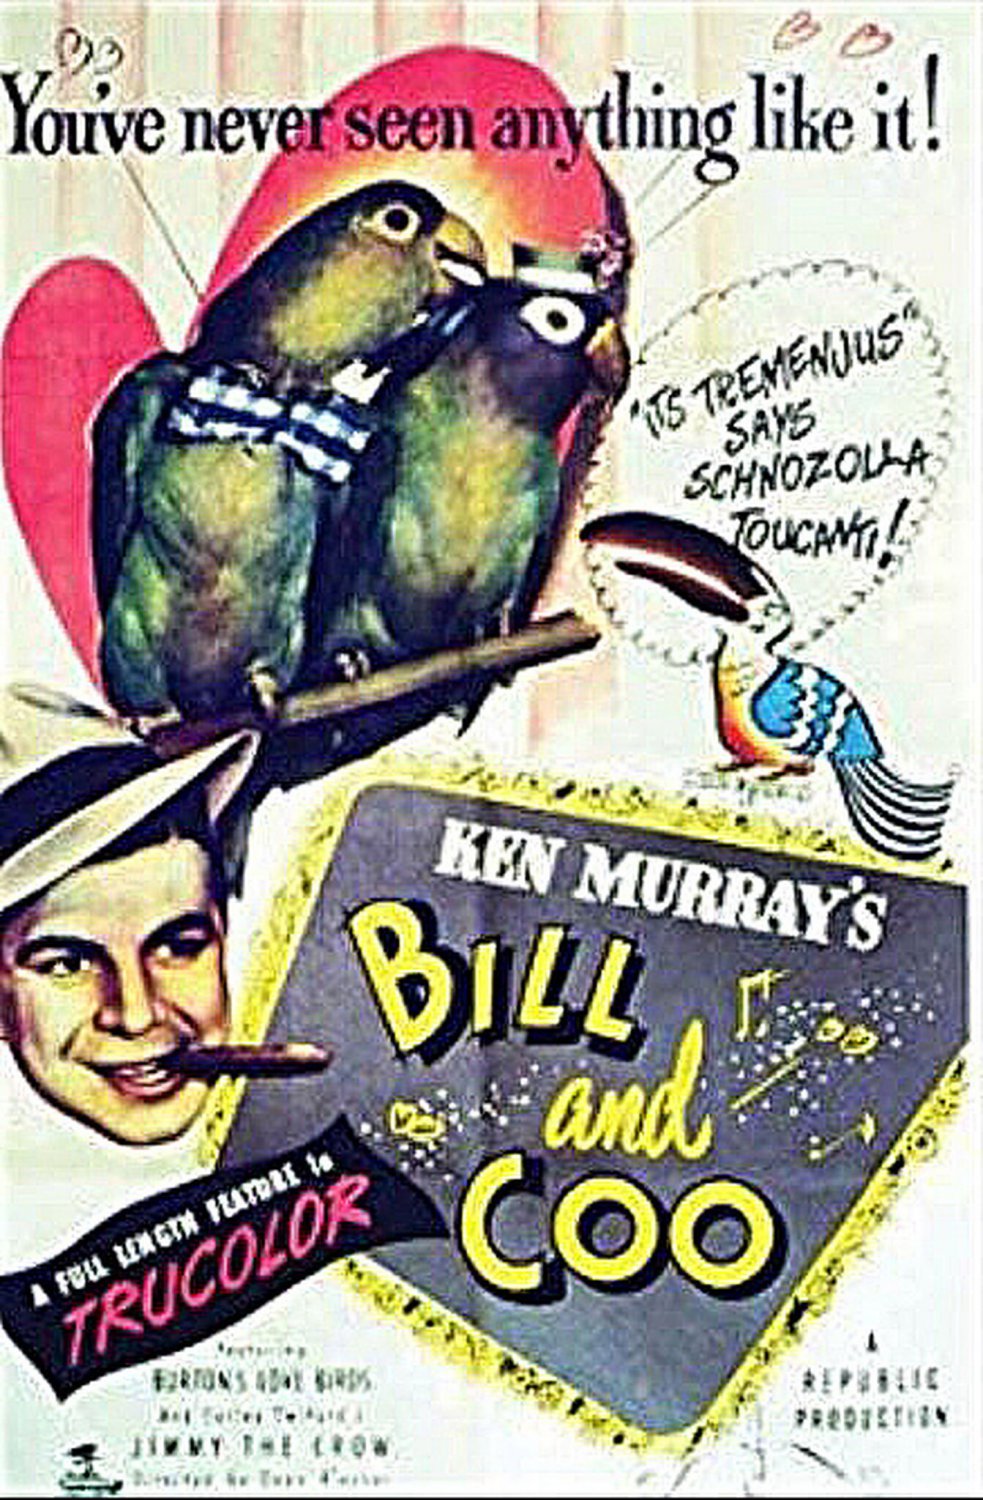 VD9390A-VD DIGITAL VIDEO Bill and Coo movie old animated adventure